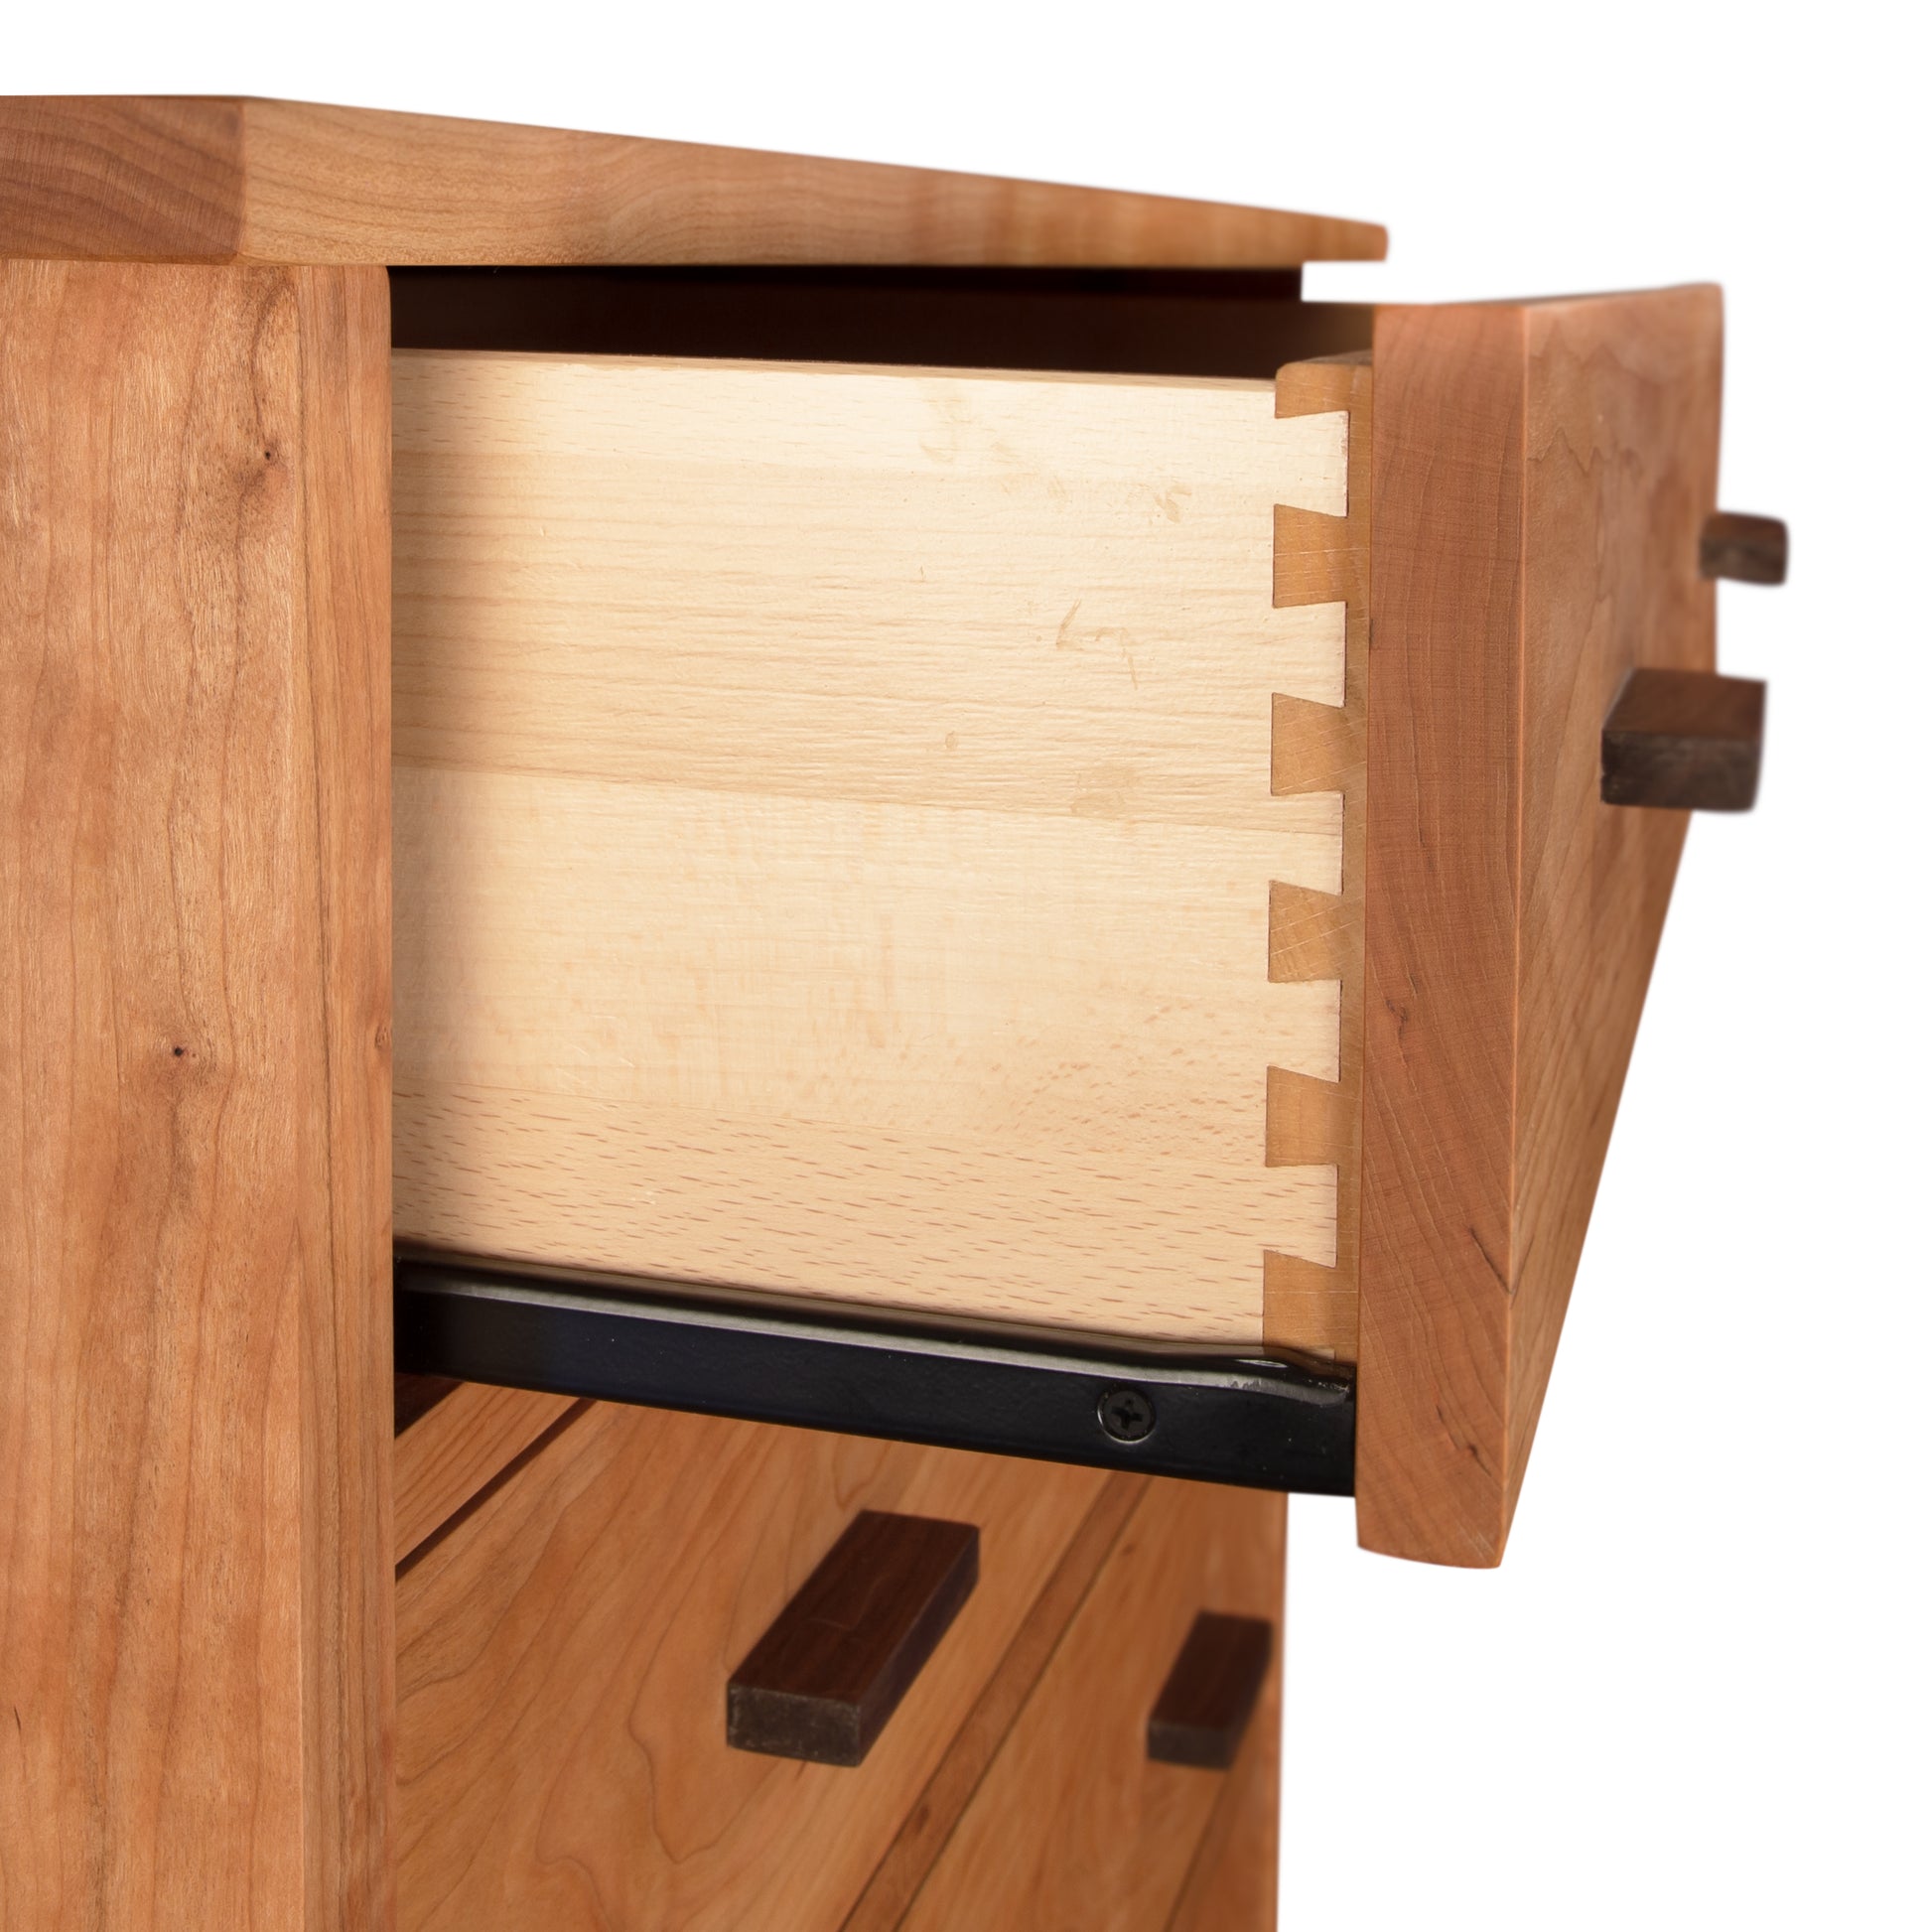 An open wooden drawer featuring dovetail joints, illustrating the craftsmanship and detail of the Vermont Furniture Designs Modern Craftsman 5-Drawer Chest.